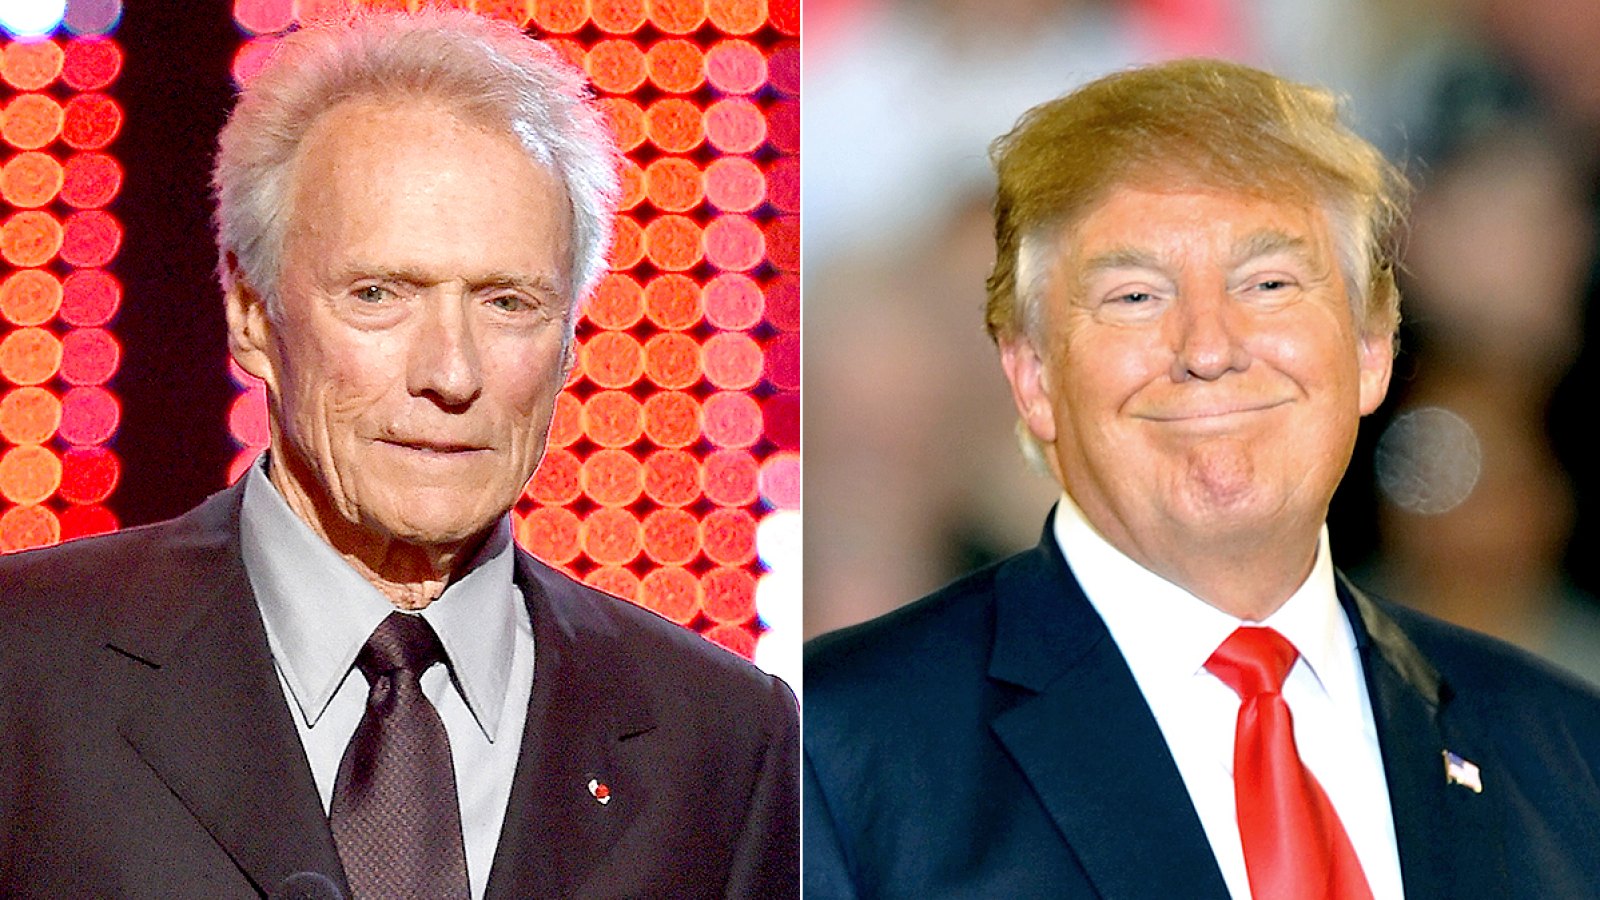 Clint Eastwood and Donald Trump